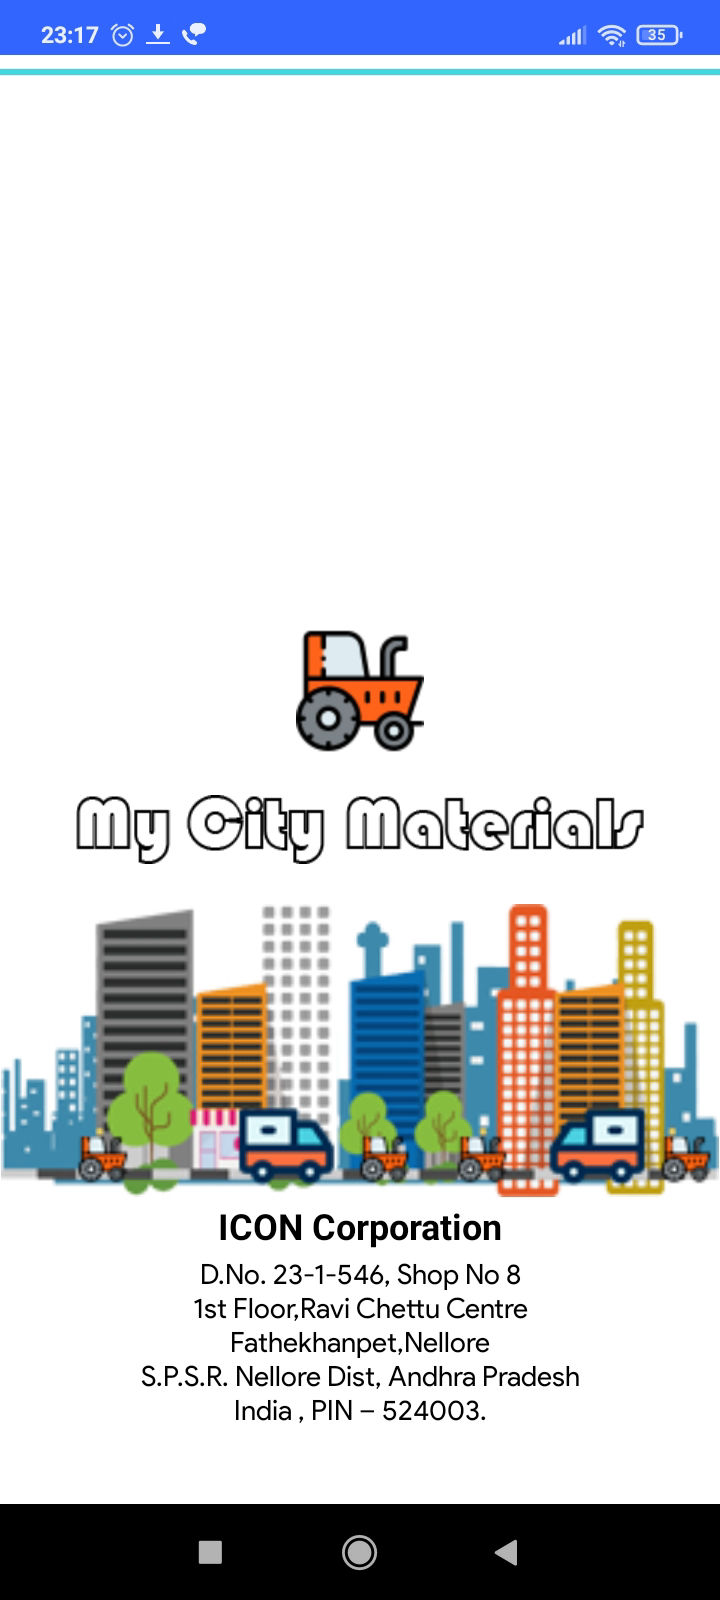 My City Materials - Buy and Sell Consttion Materials Online